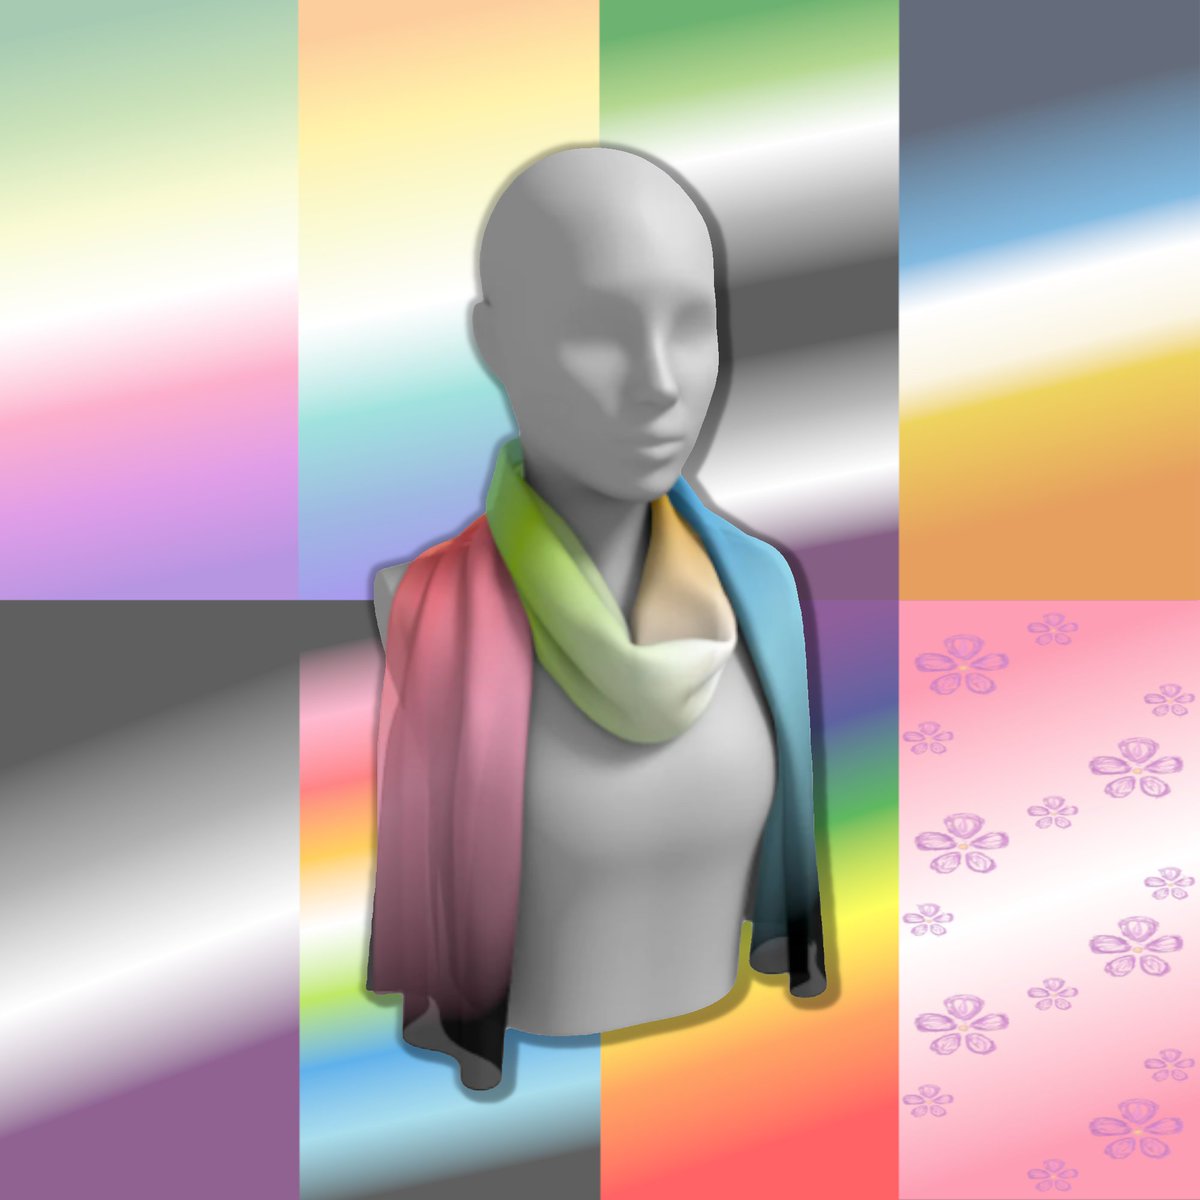 A while ago I wanted to offer scarves, but the available products weren't good enough. Now that I've partnered with @ArtofWhereTeam I can offer soft, draping scarves for any identity. I can't wait for mine to get here!

#queerartist #queerbusiness #pridescarves #LGBTQ #queergifts